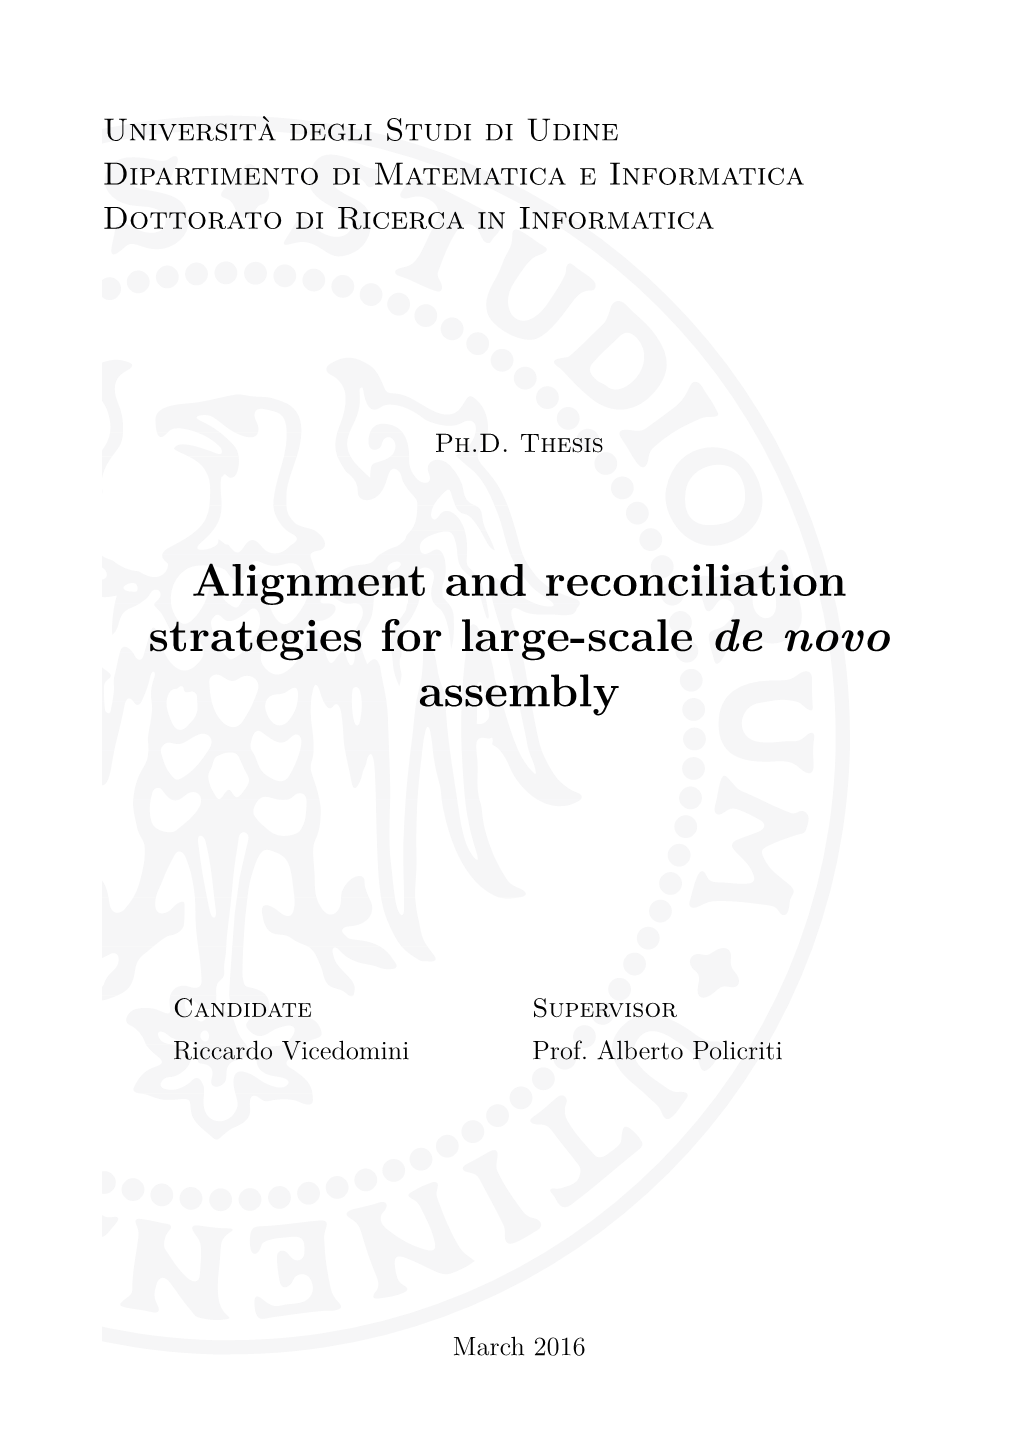 Alignment and Reconciliation Strategies for Large-Scale De Novo Assembly